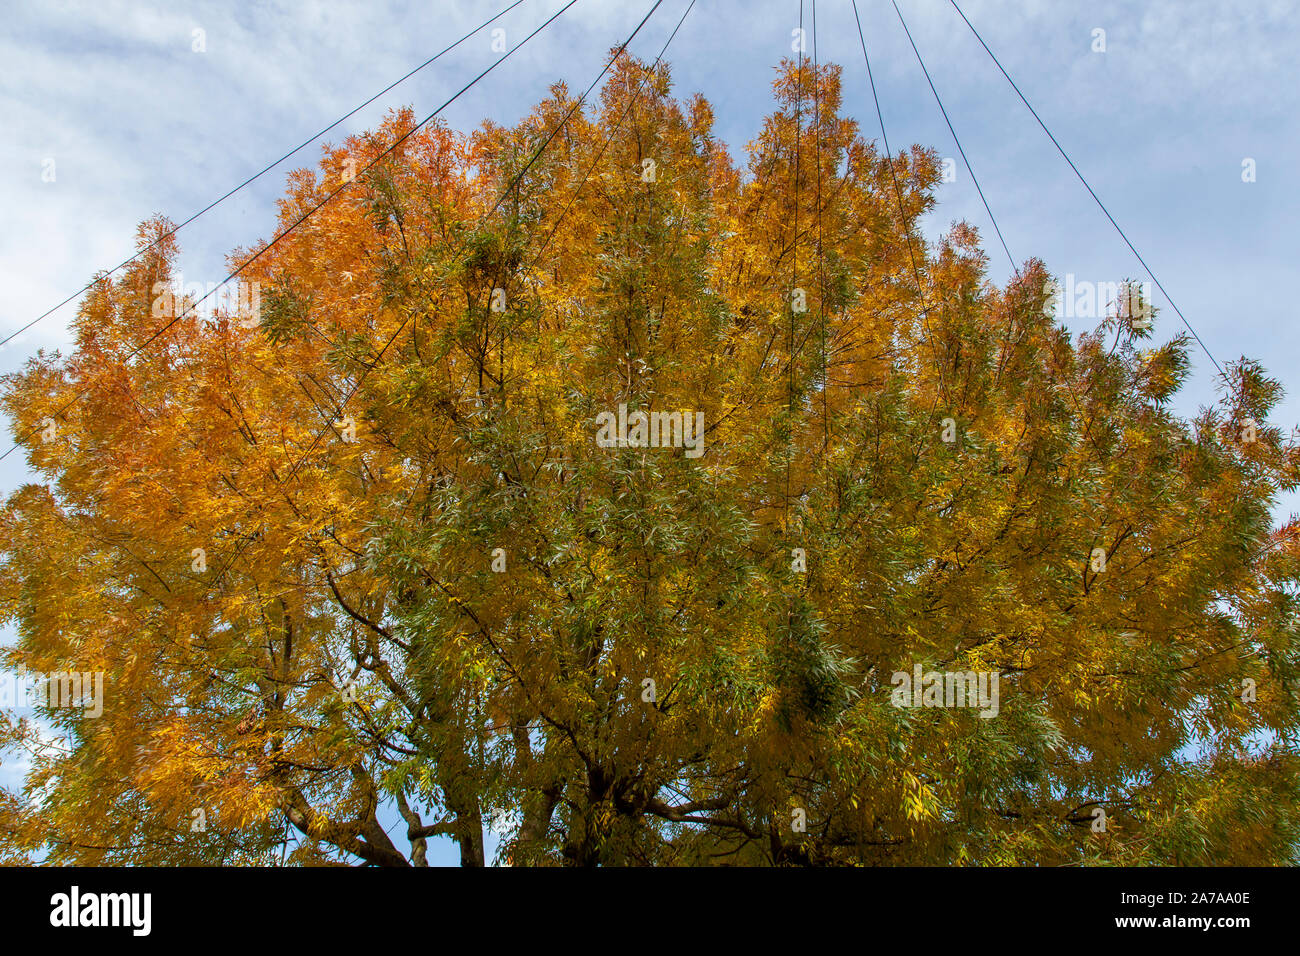 Autumn leaves in the canopy of a Raywood Ash (Fraxinus angustifolia 'Raywood'), a cultivar of Caucasian narrow leaved ash, urban tree, London Stock Photo